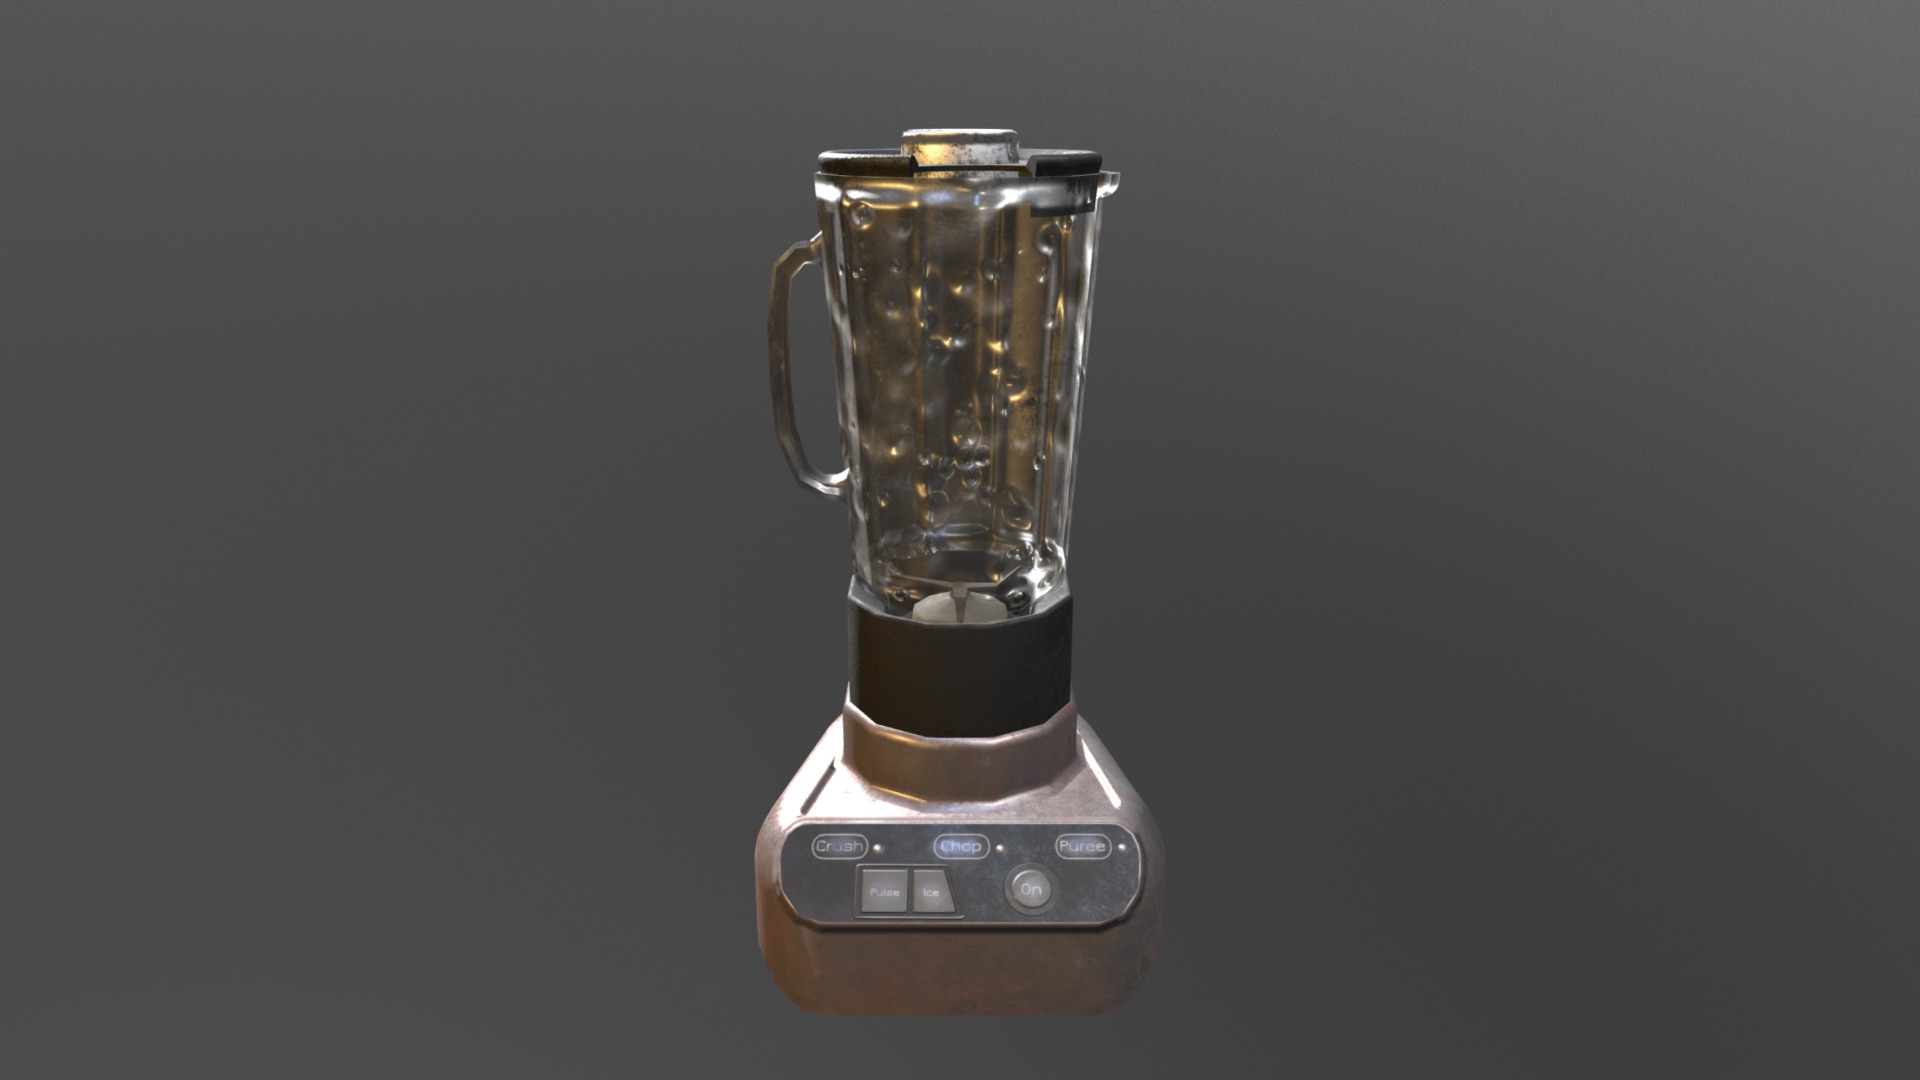 3D model Wasteland Explorer – Blender - This is a 3D model of the Wasteland Explorer - Blender. The 3D model is about a glass jar with a brown liquid.